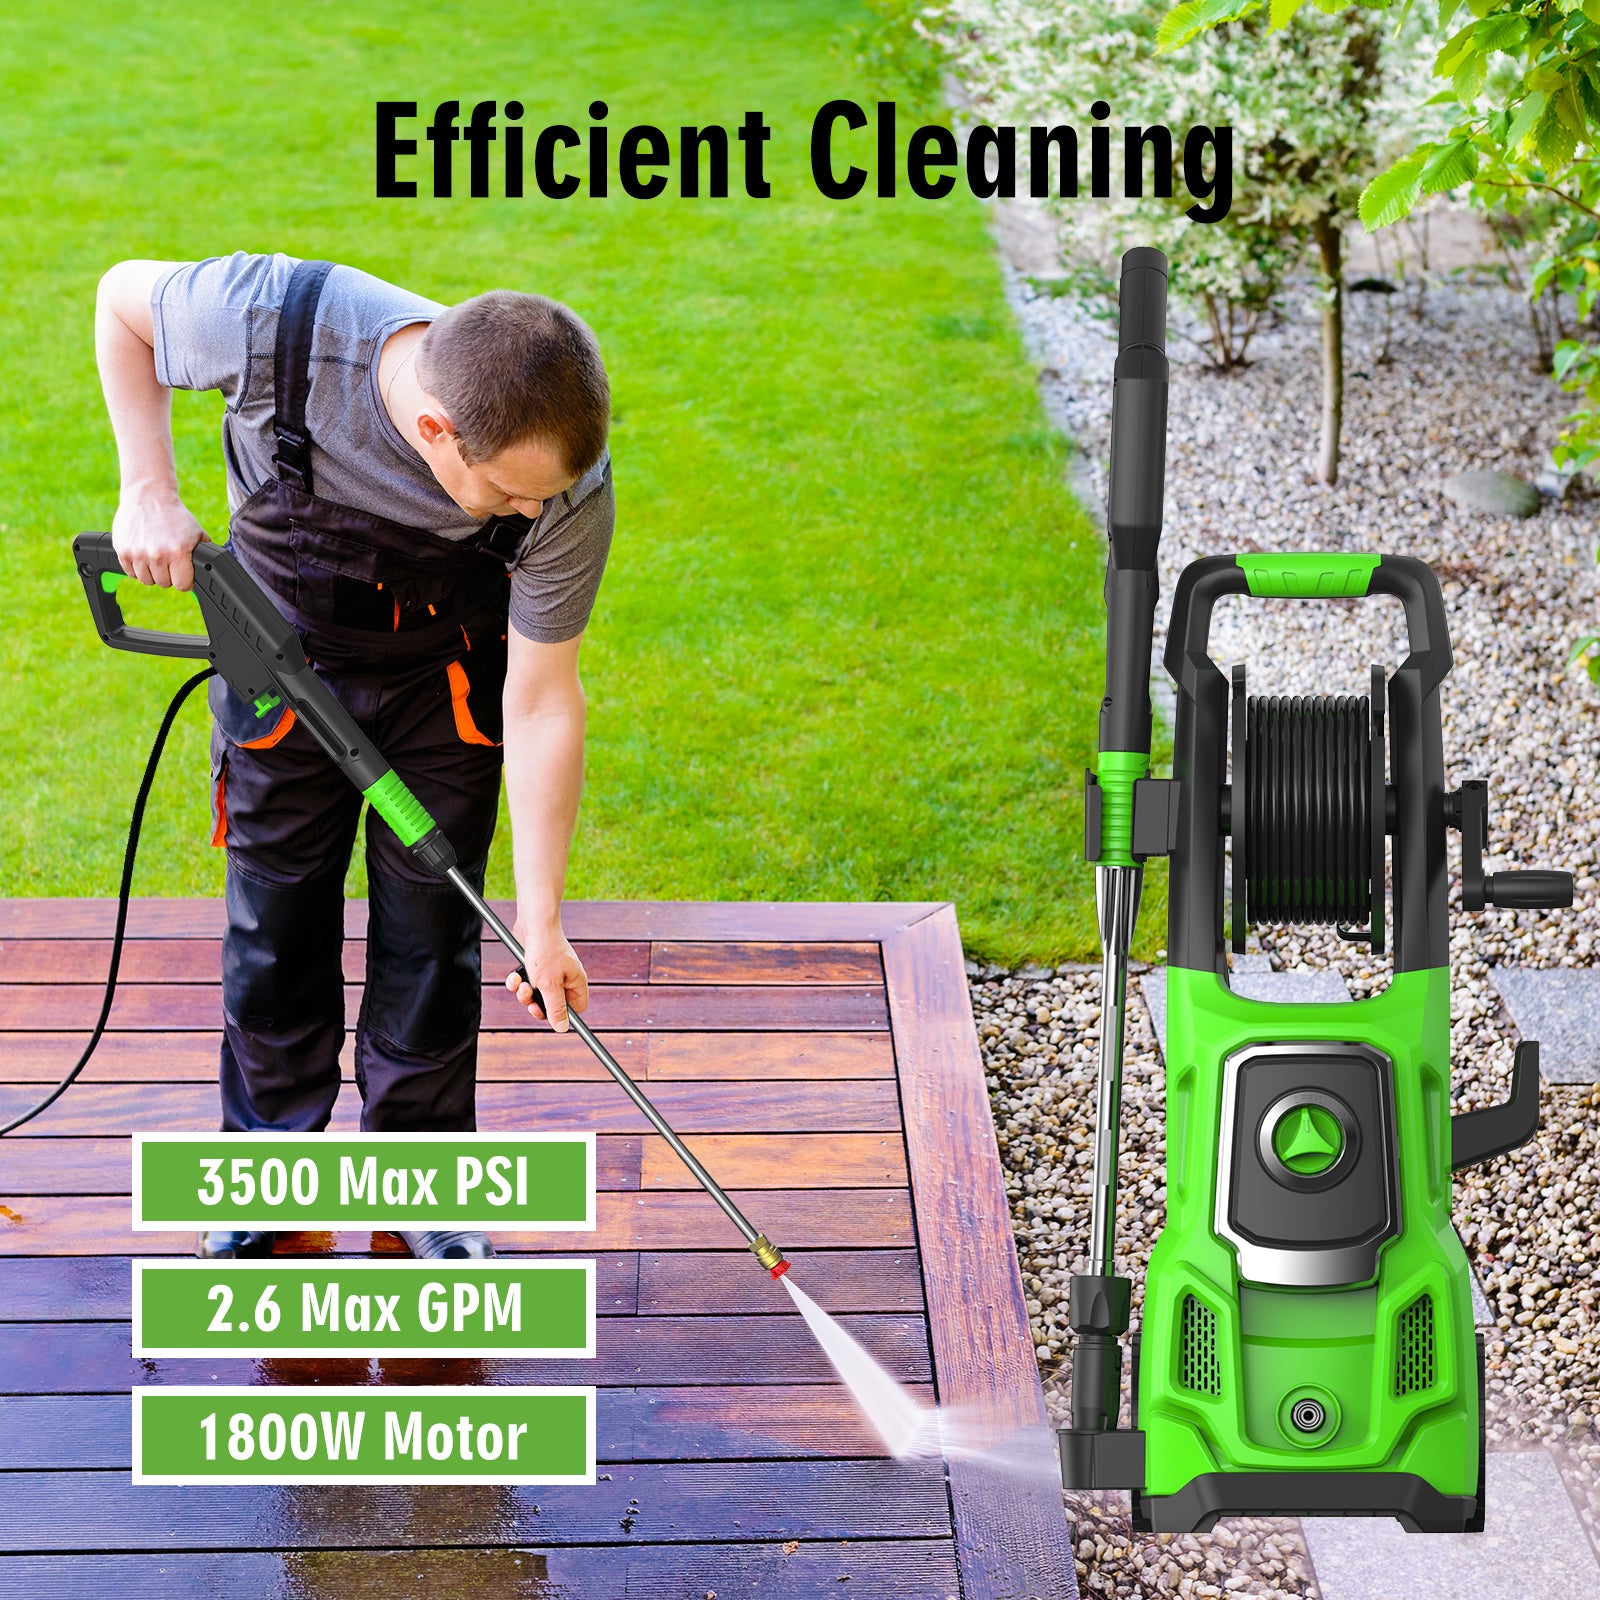 Paris Rhone SI-TH004 Electric Pressure Washer, 3200 Max PSI, 2.6 GPM Power Washer Machine with Hose Reel,4 Quick Connect Nozzles WM